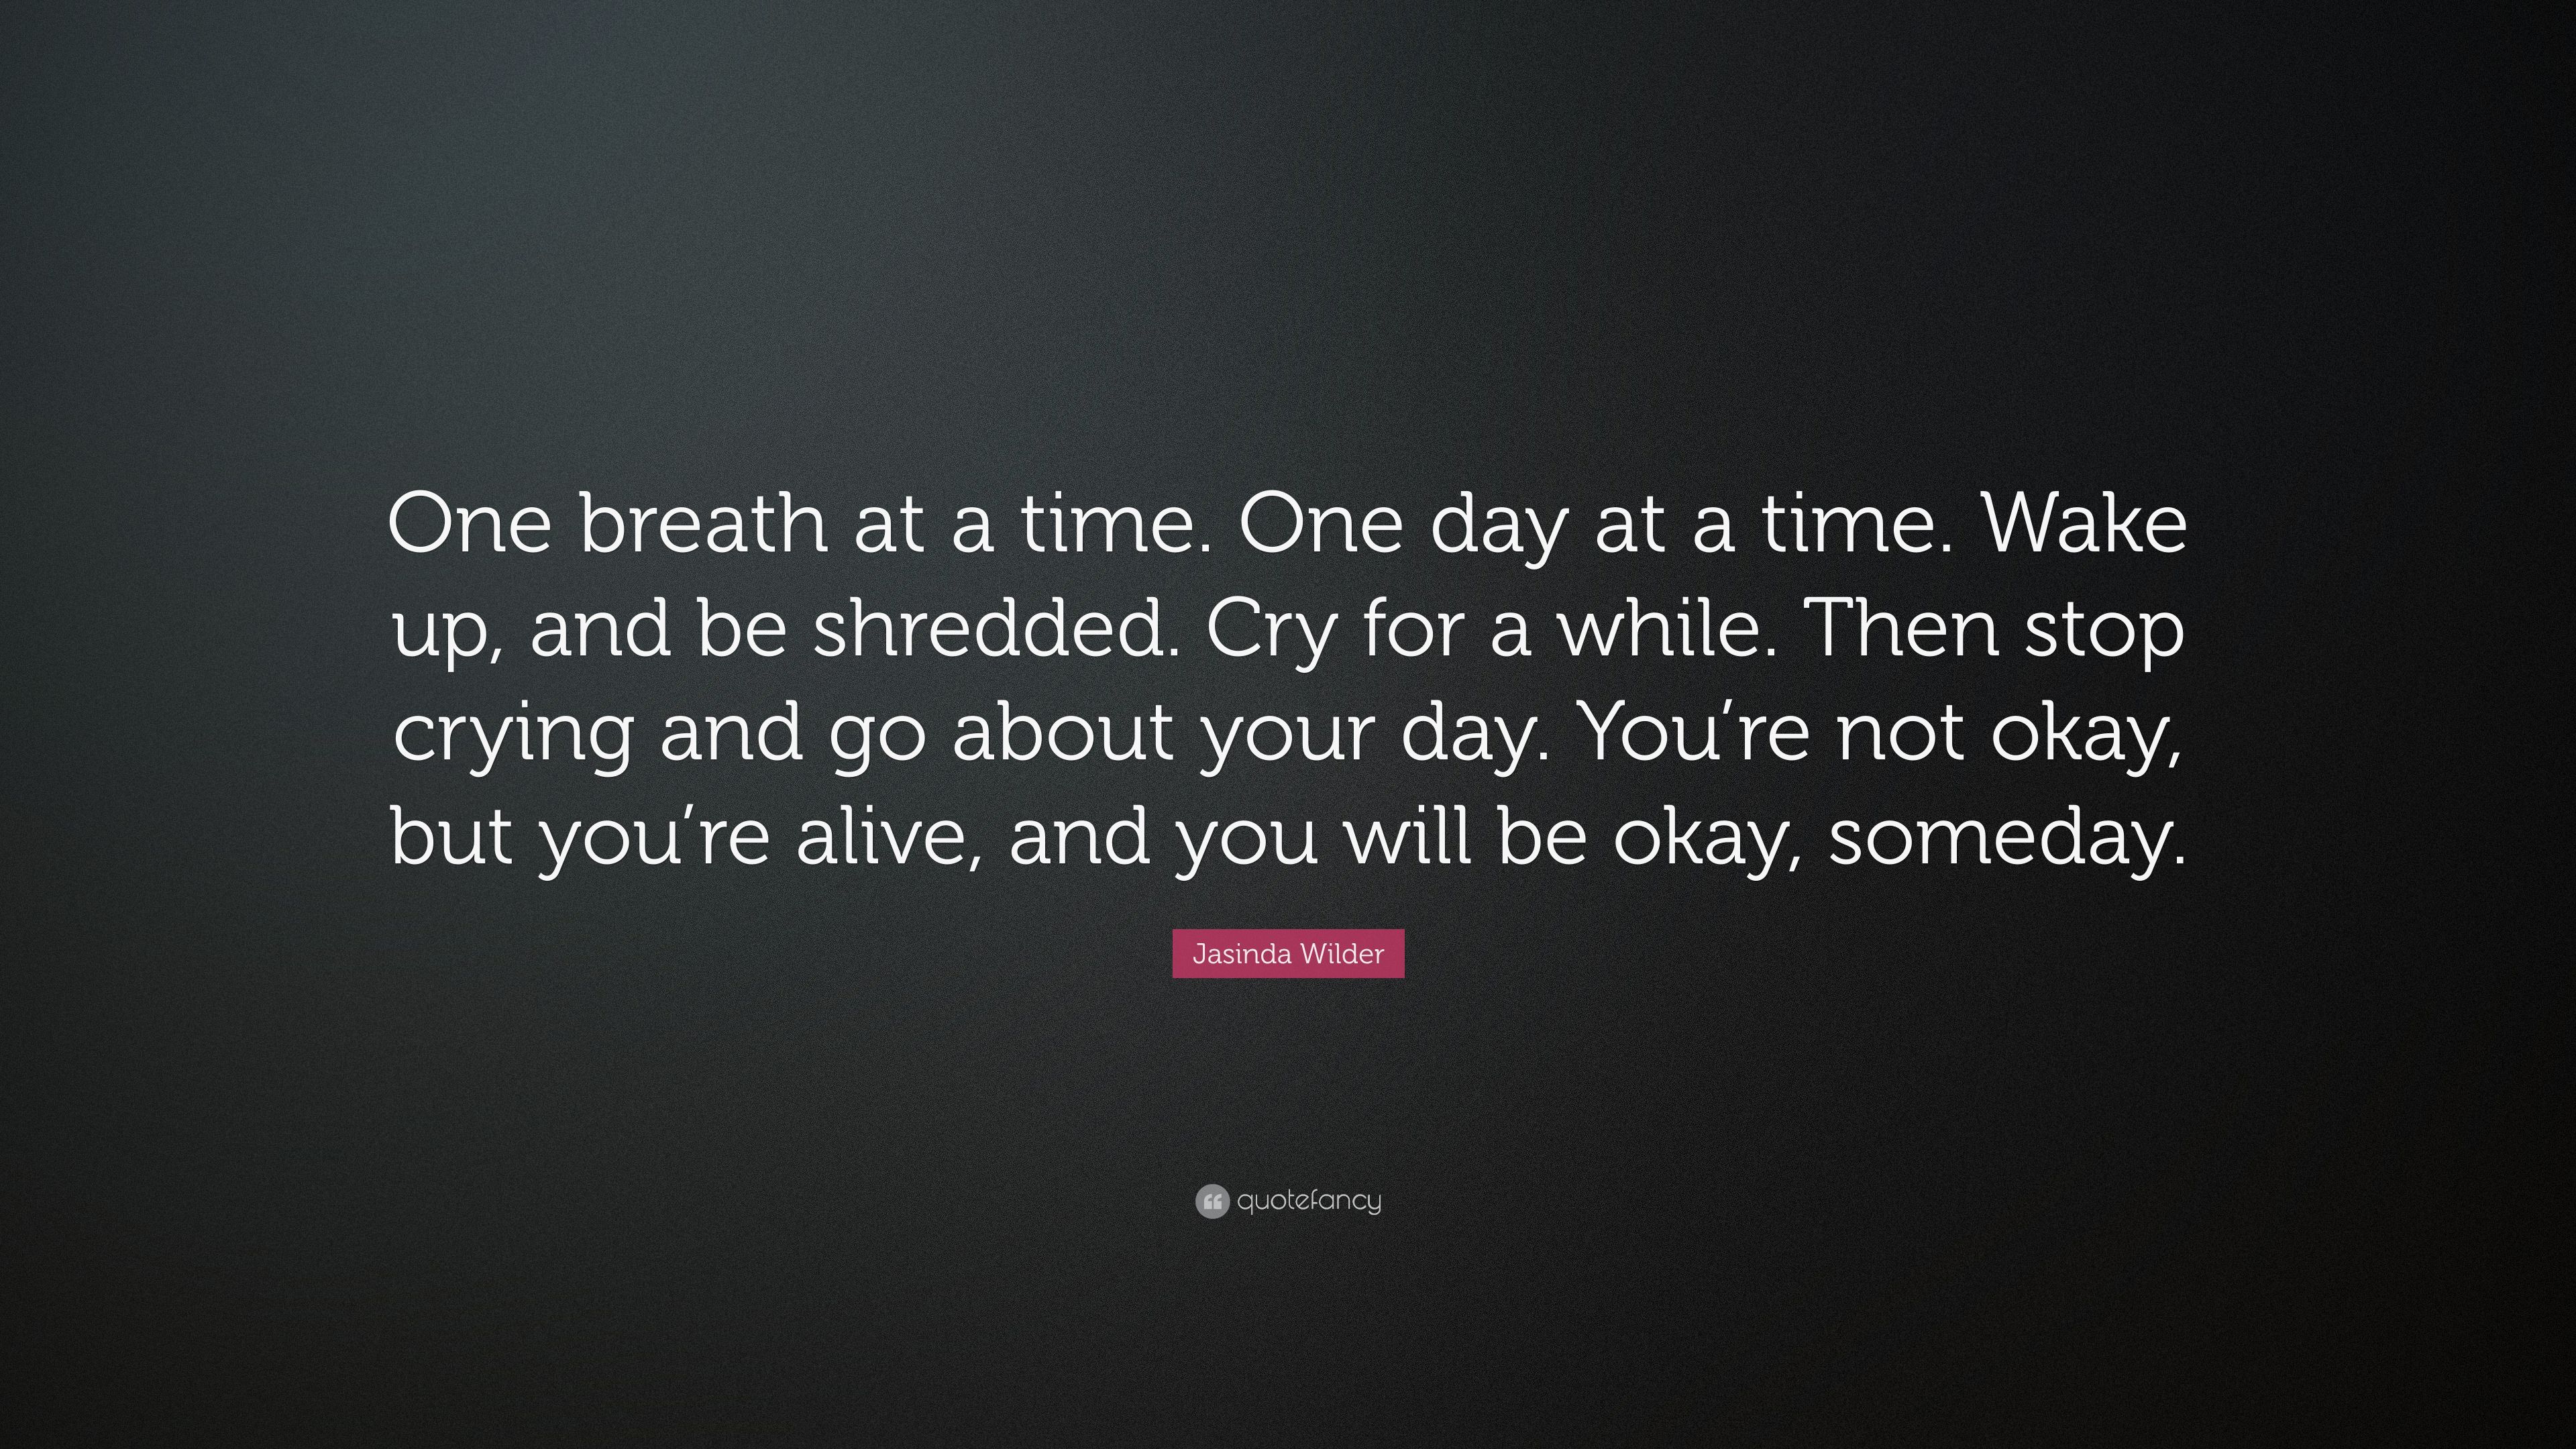 Jasinda Wilder Quote: “One breath at a time. One day at a time